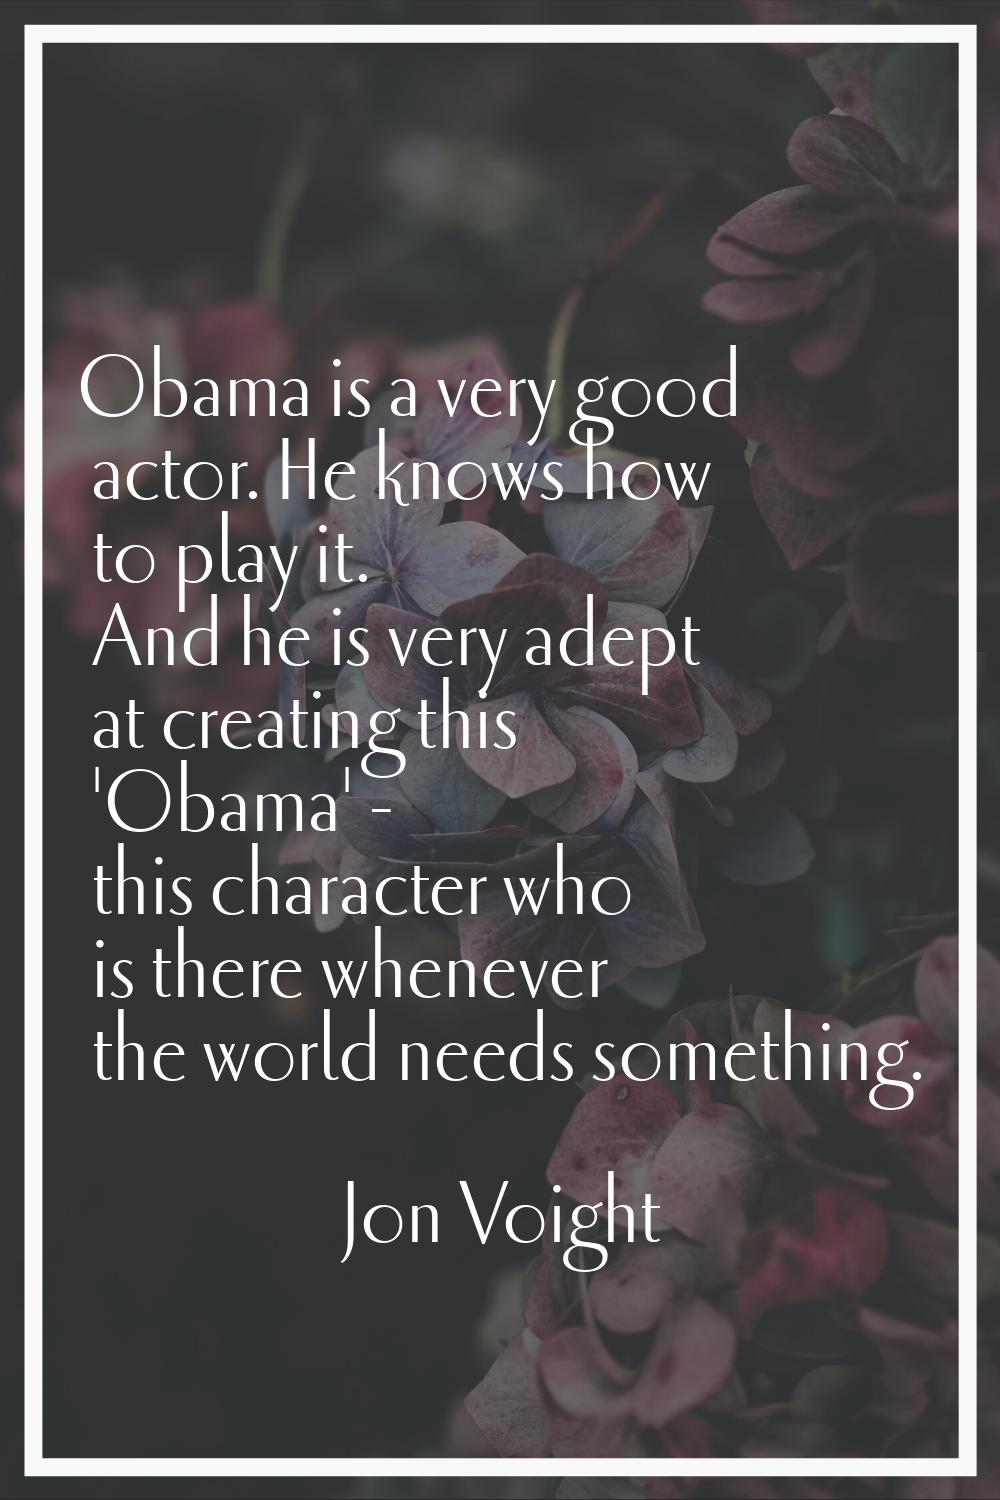 Obama is a very good actor. He knows how to play it. And he is very adept at creating this 'Obama' 